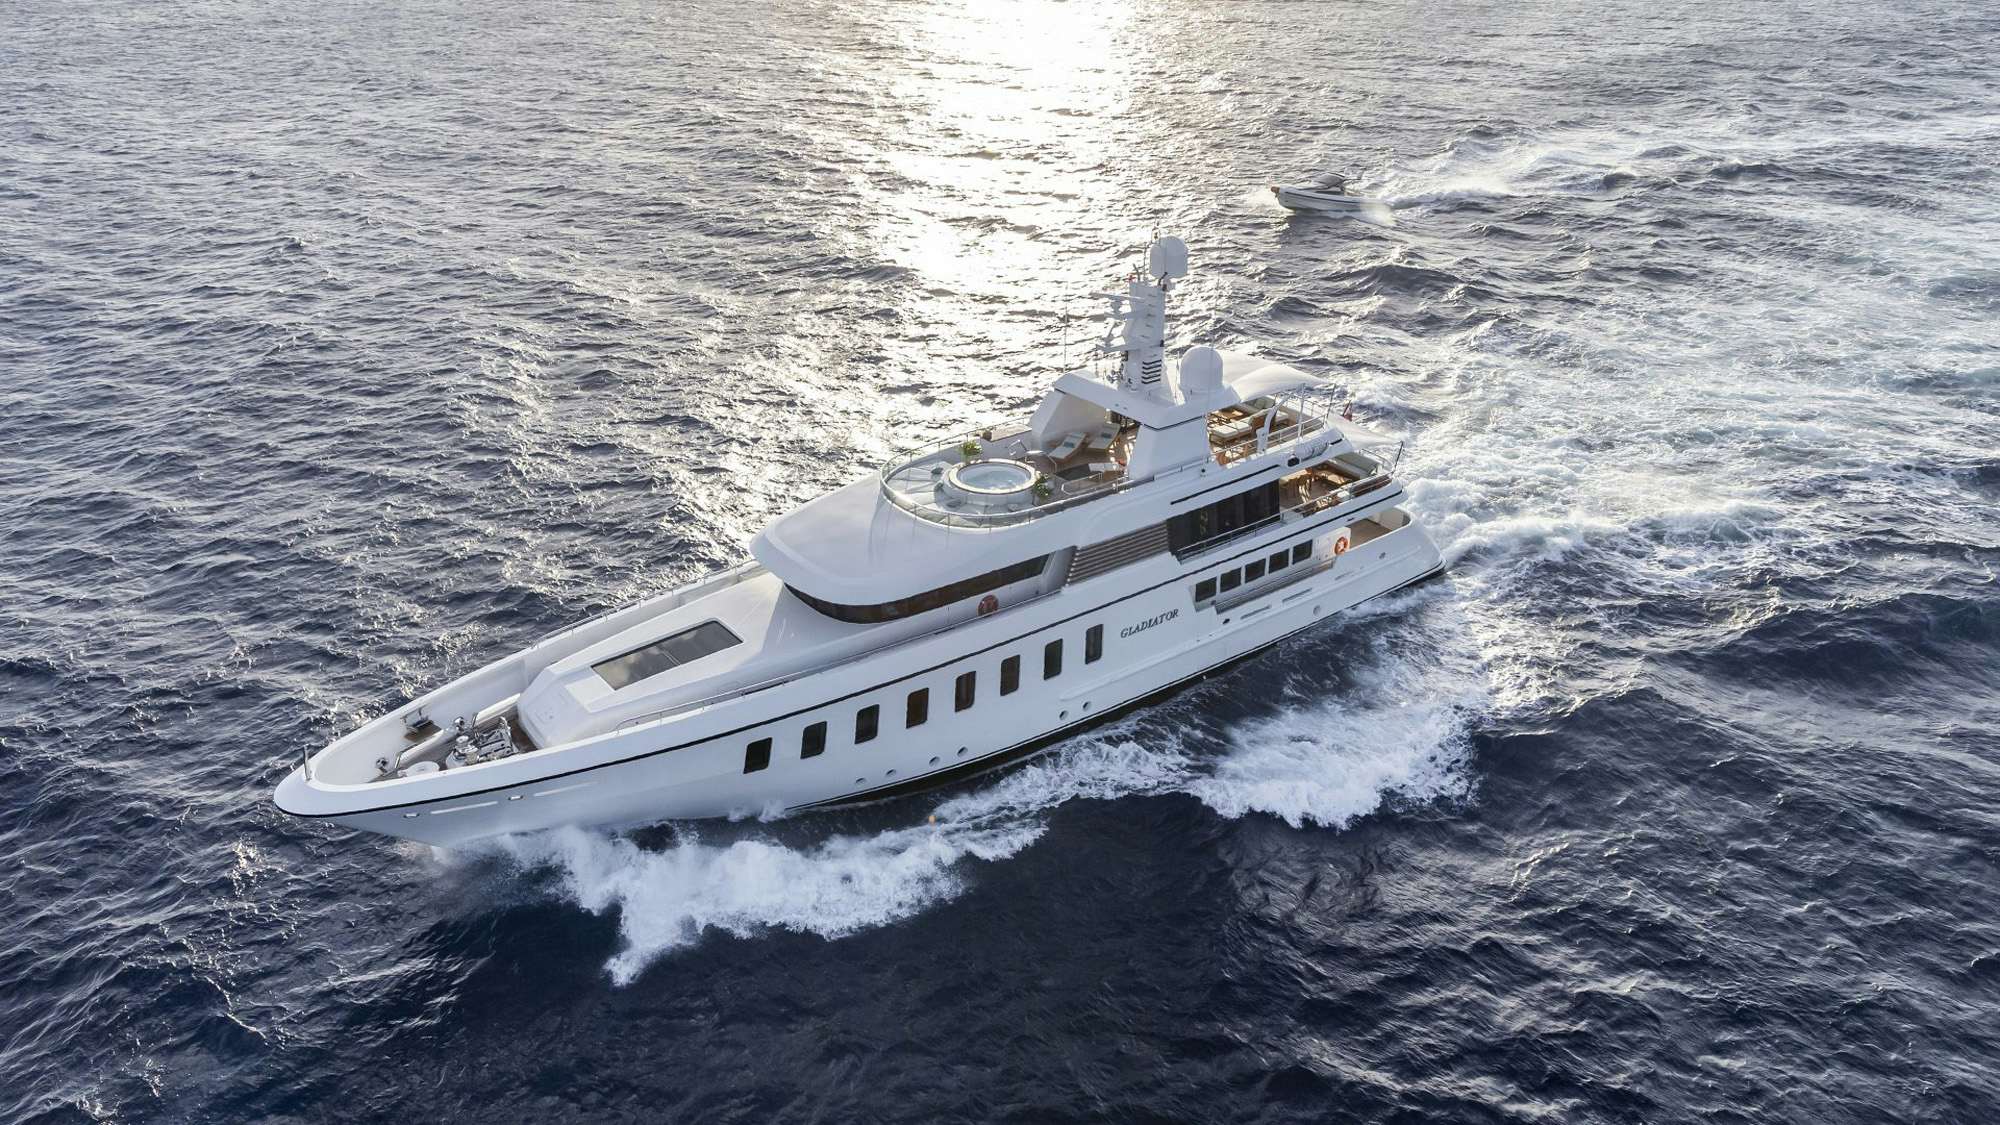 Watch Video for GLADIATOR Yacht for Charter